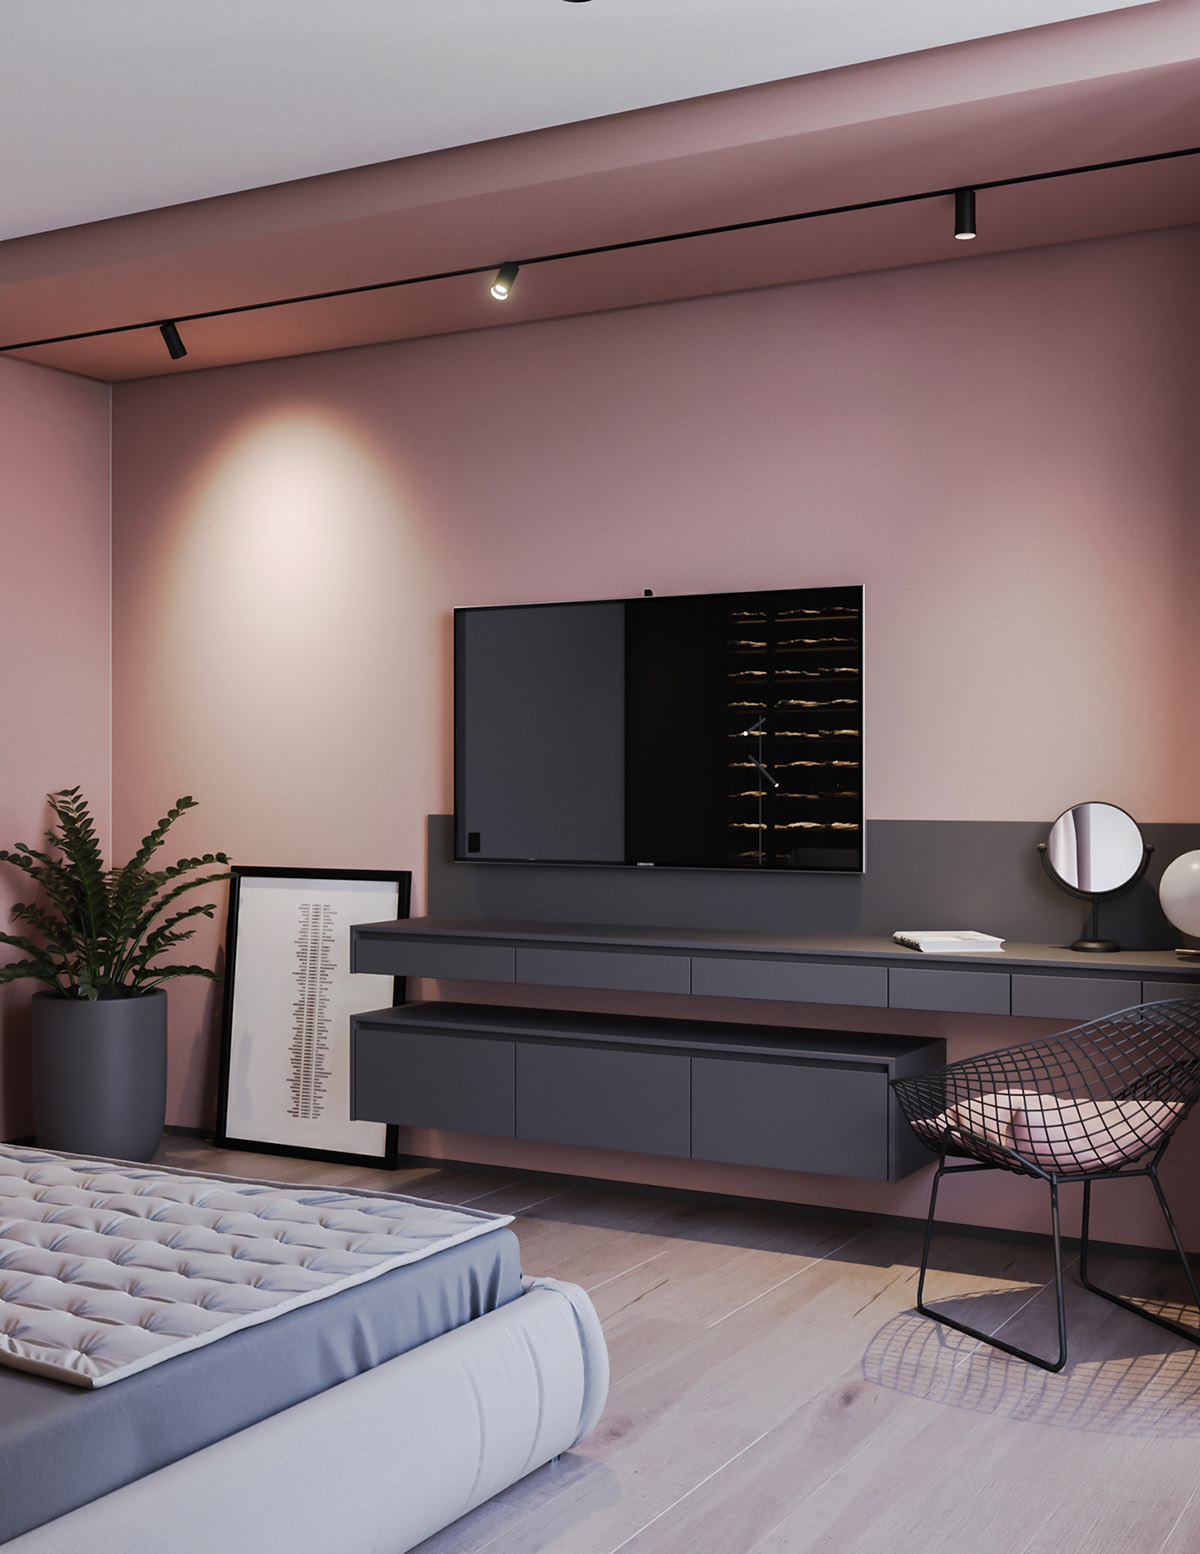 A Striking Example Of Interior Design Using Pink & Grey